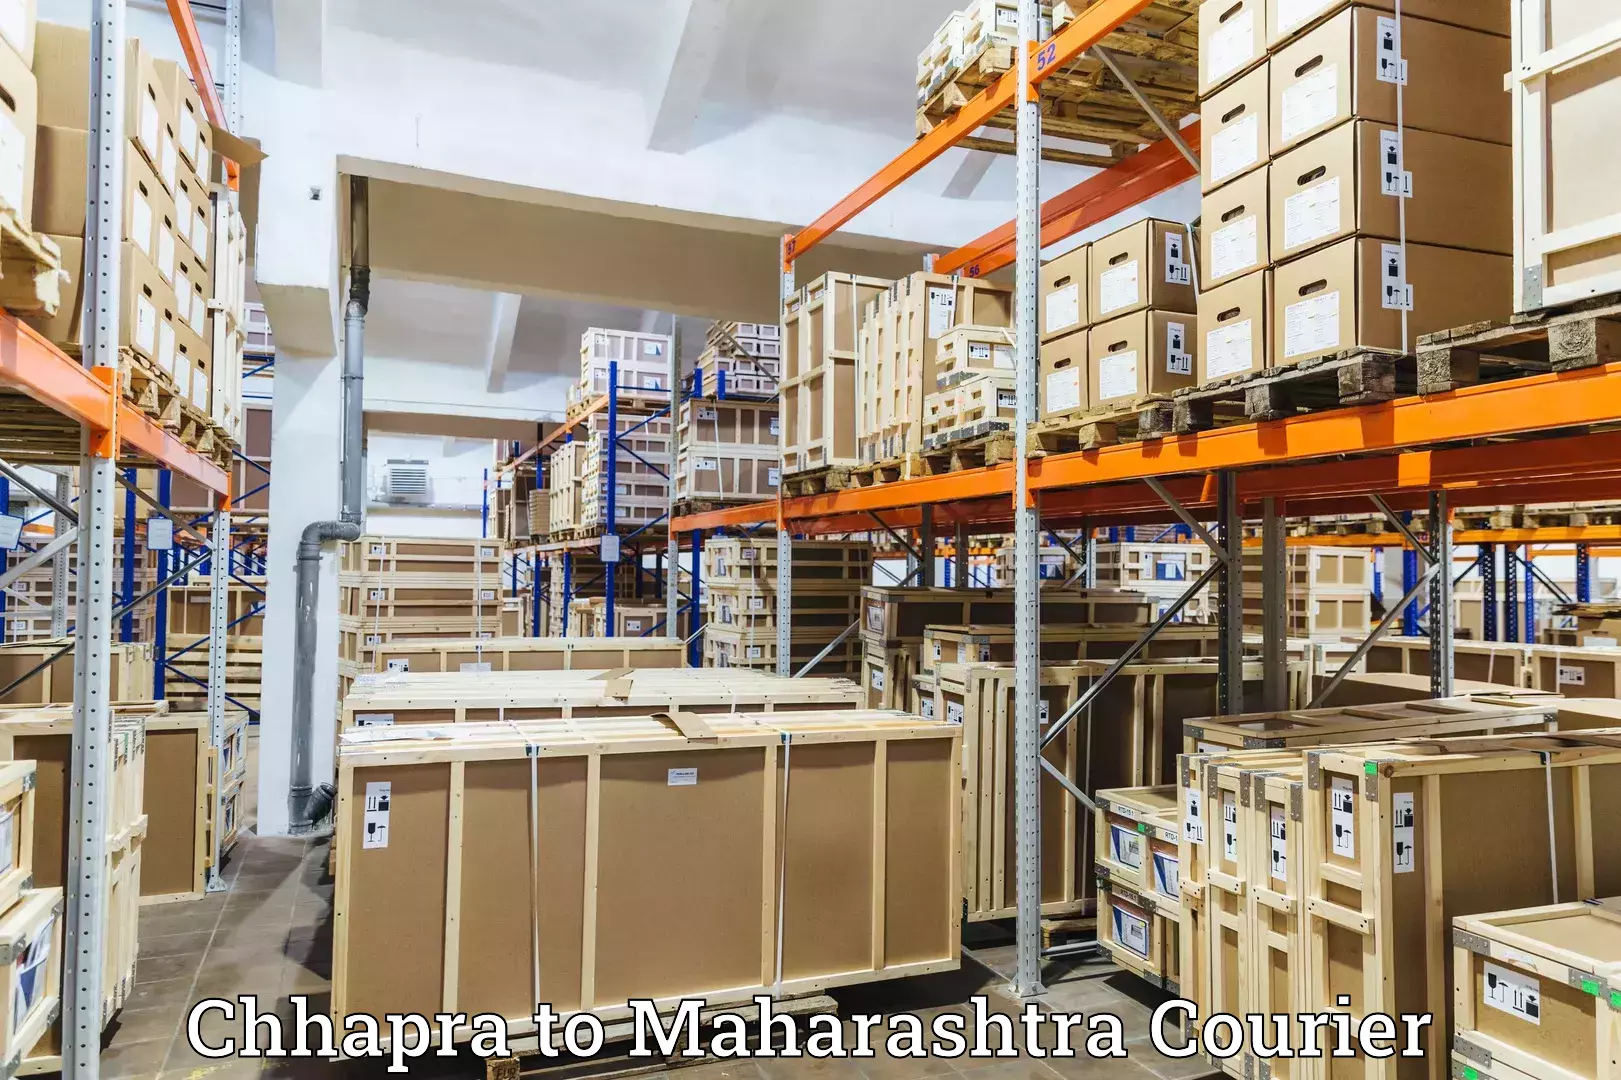 Nationwide shipping capabilities in Chhapra to Beed